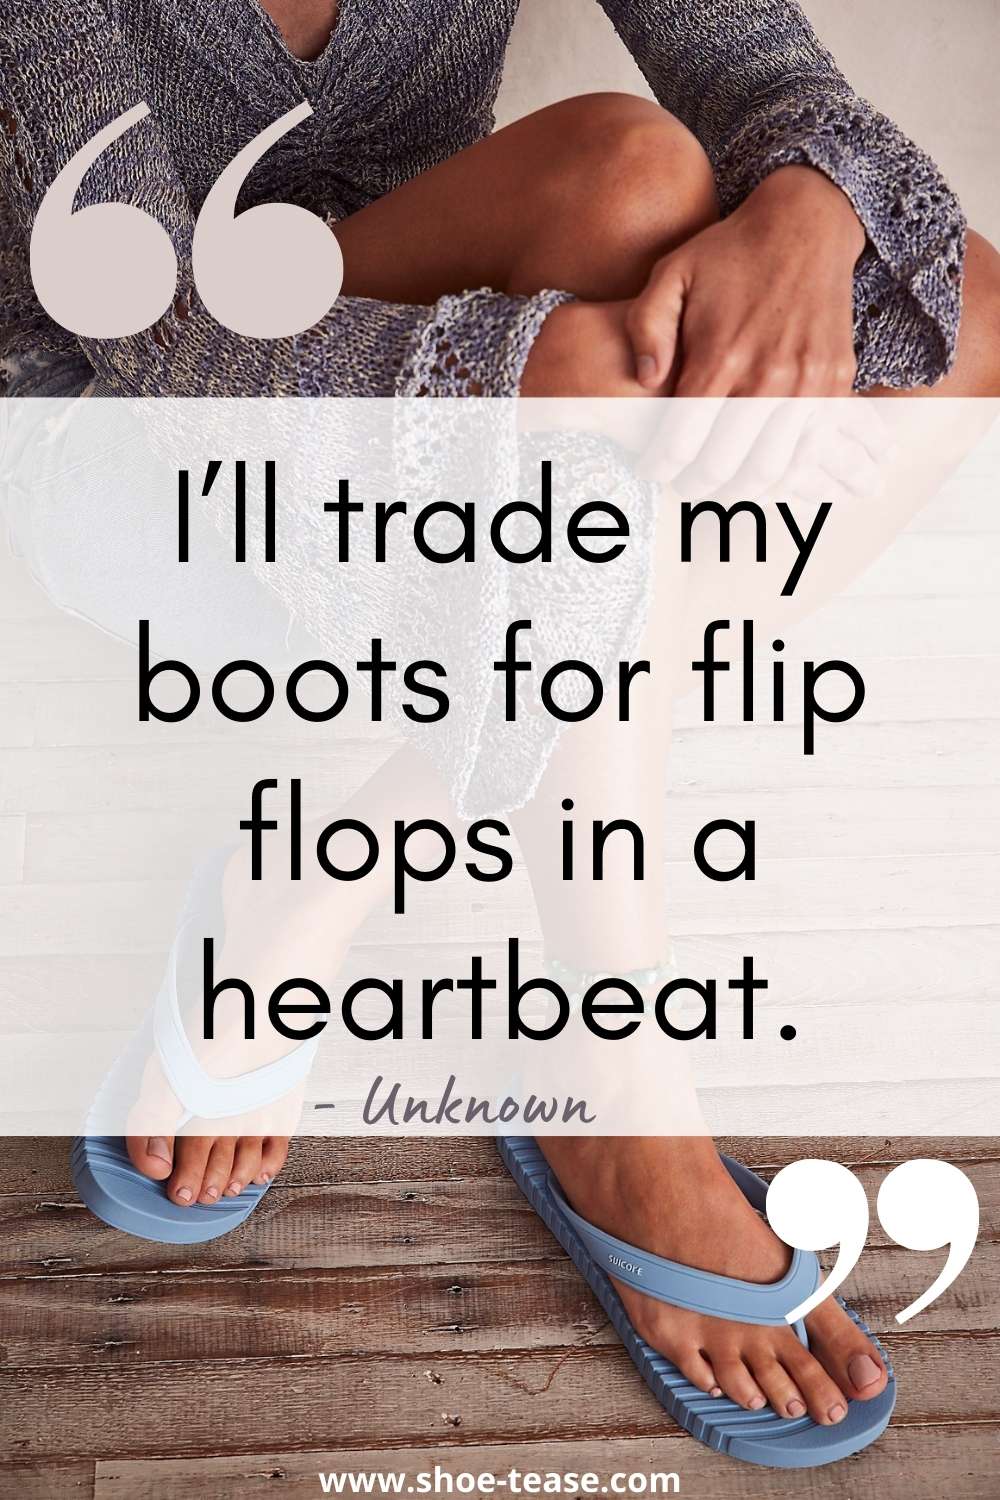 Flip flop quote reading I'll trade my boots for flip flops in a heartbeat unknown over image of woman sitting wearing blue flip flops.